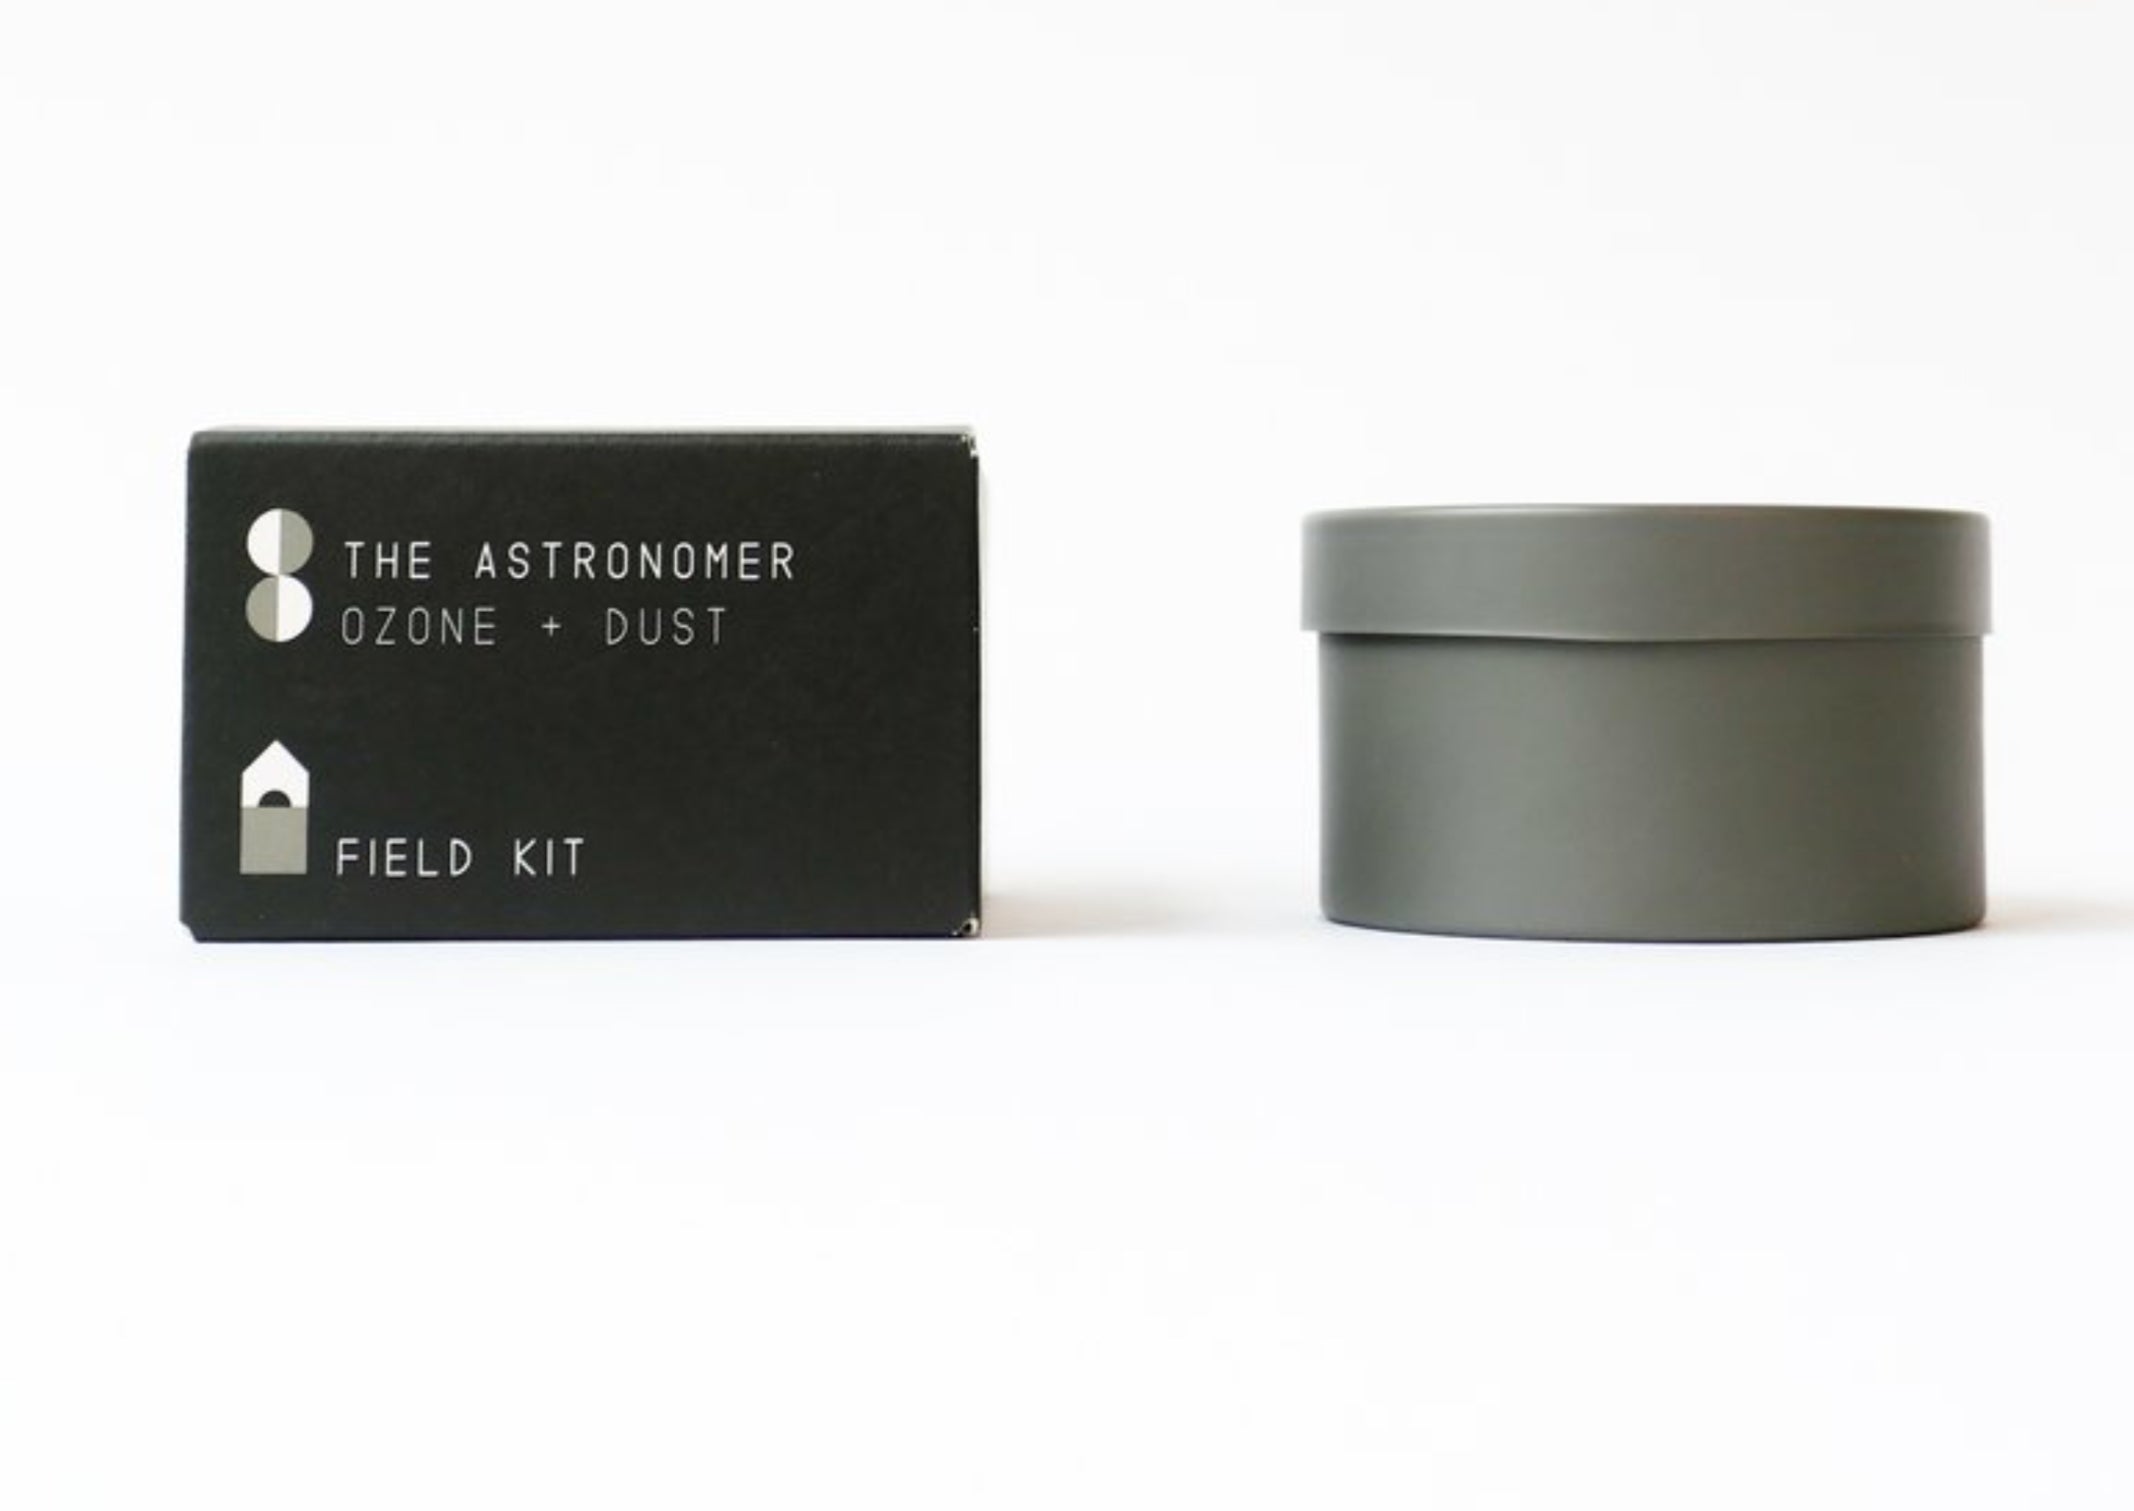 Field Kit Candle - The Astronomer - Tin Candle